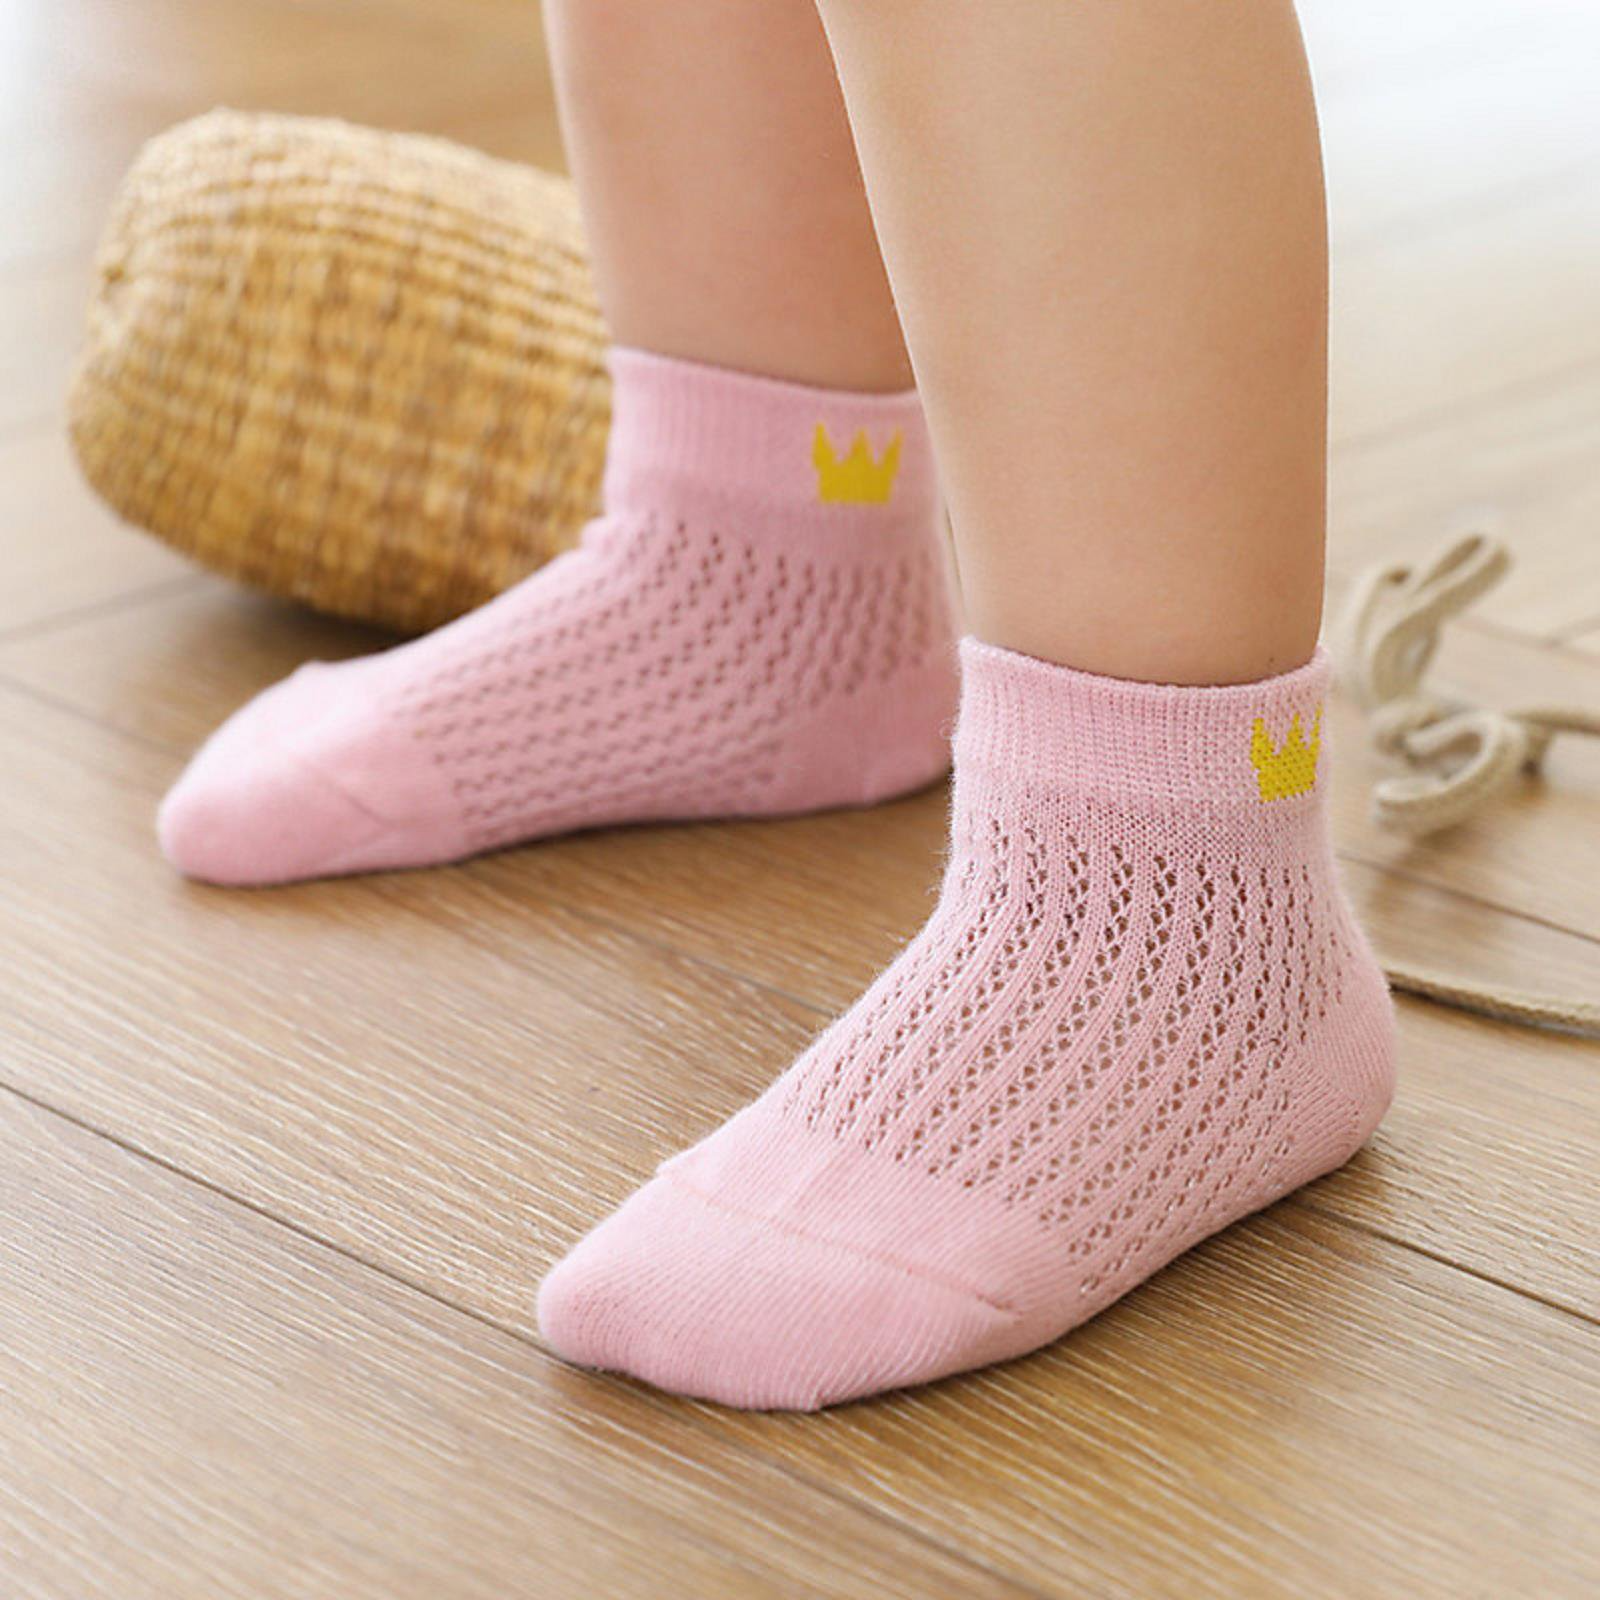 Summer Crown Socks for Your Little Prince or Princess